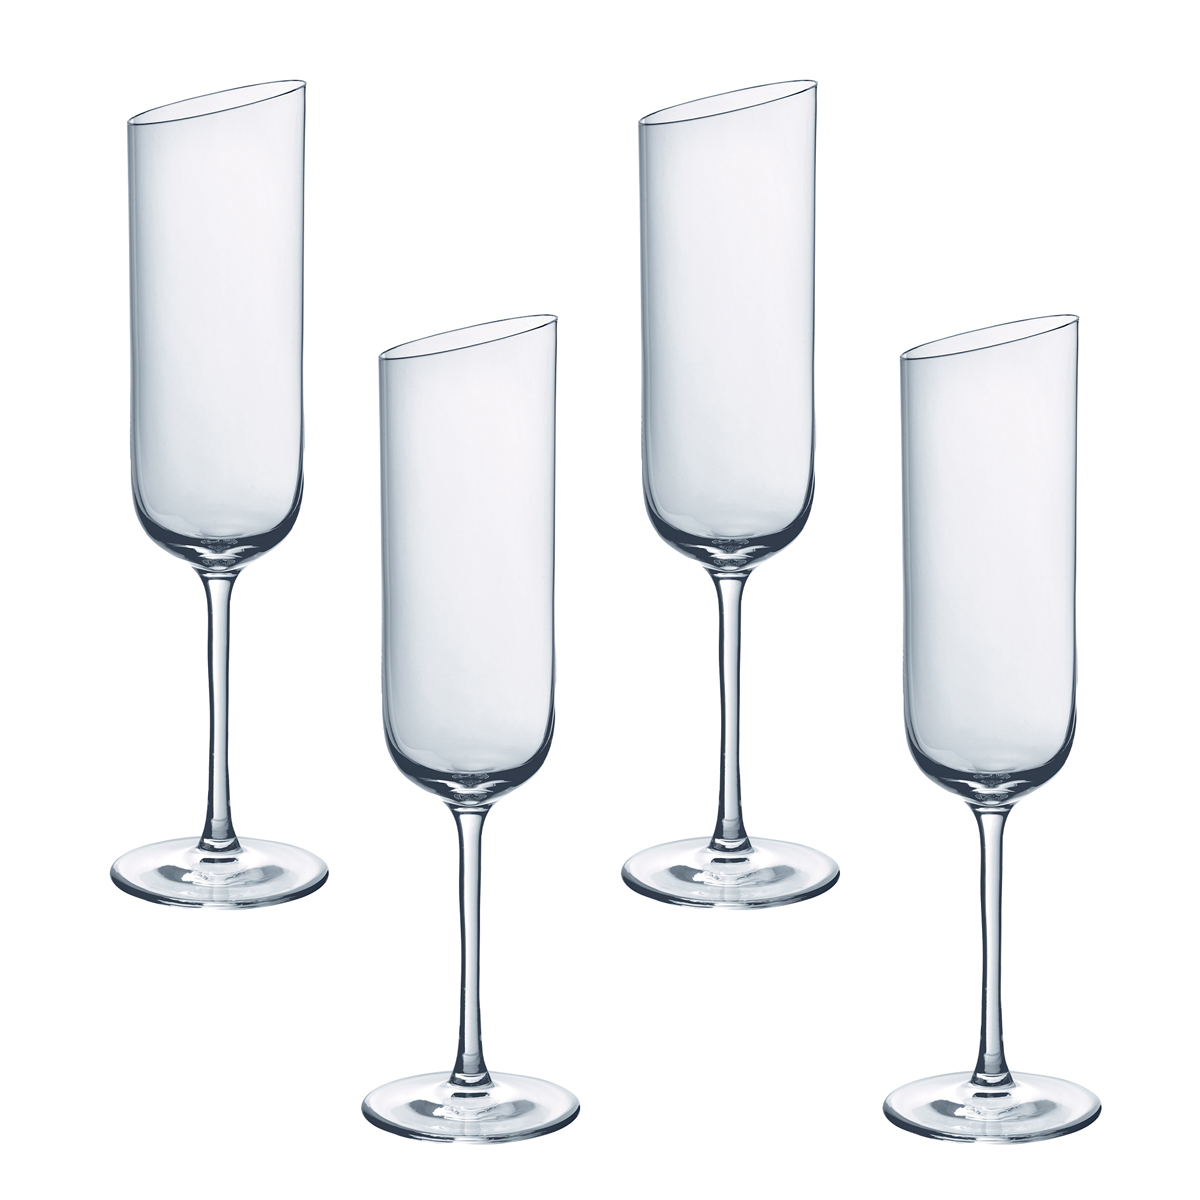 Villeroy and Boch NewMoon Champagne Flute Glasses, Set of 4